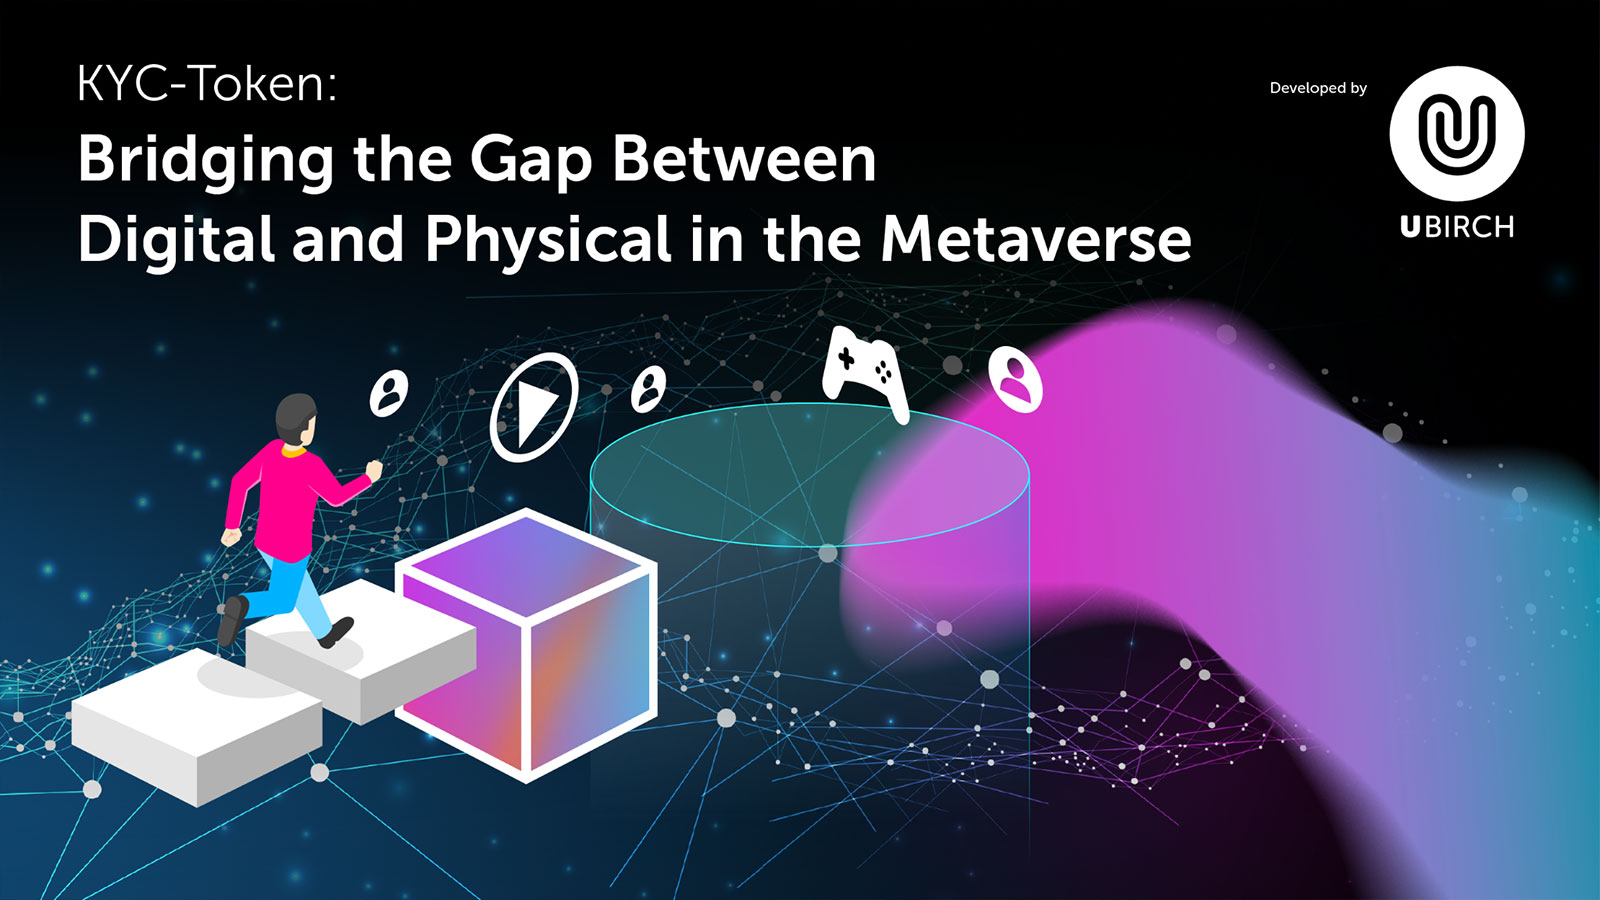 KYC-Token: Bridging the Gap Between Digital and Physical in the Metaverse